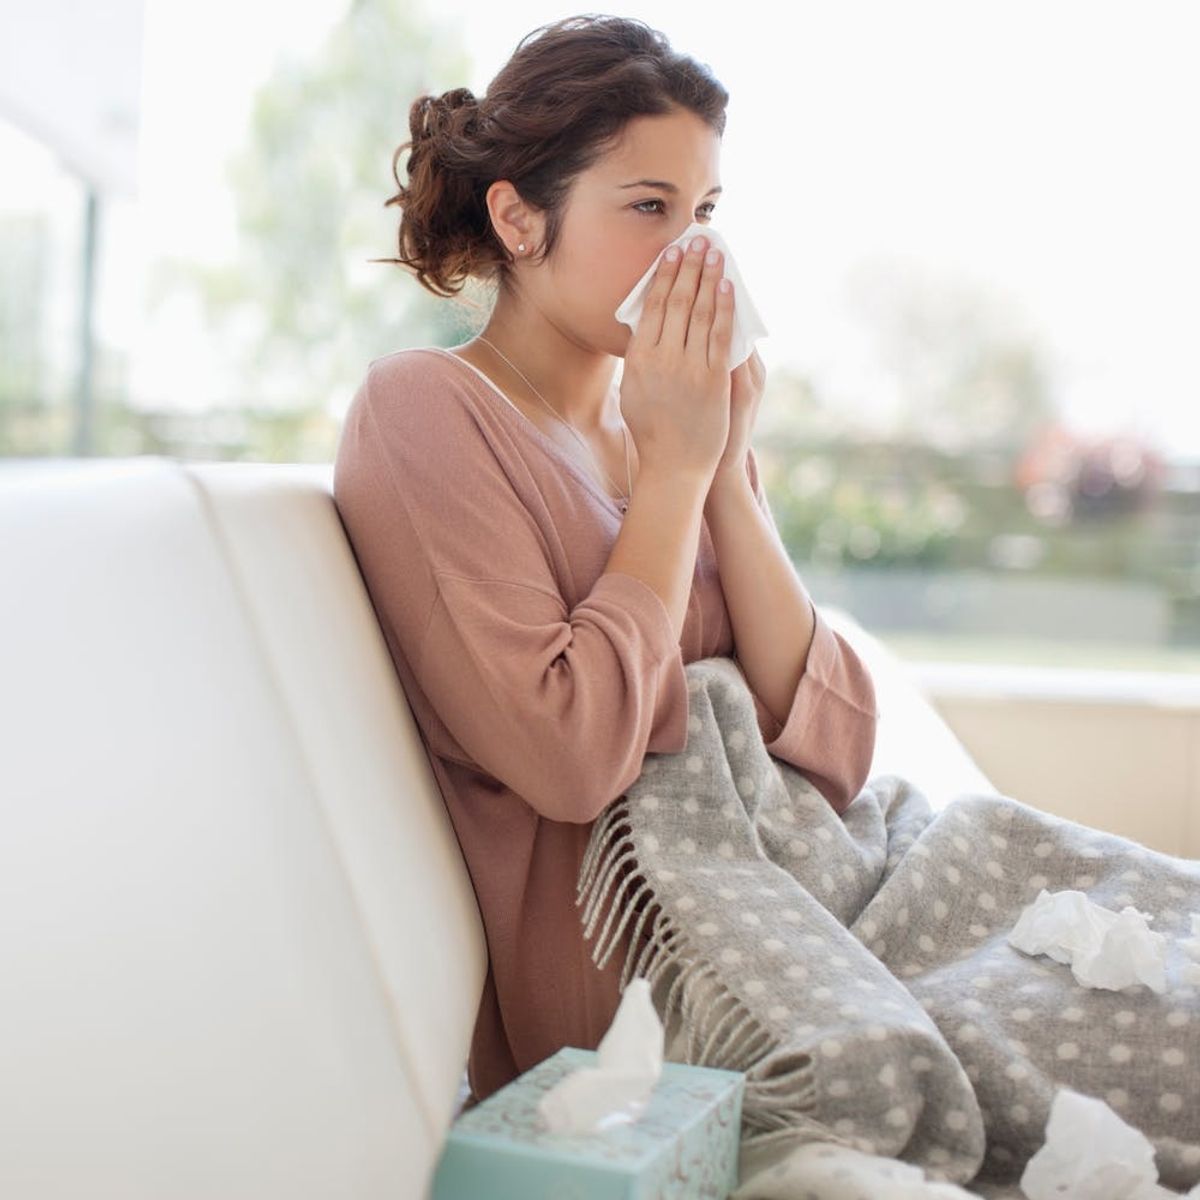 6 Things to Do When You Feel Like You’re Getting Sick